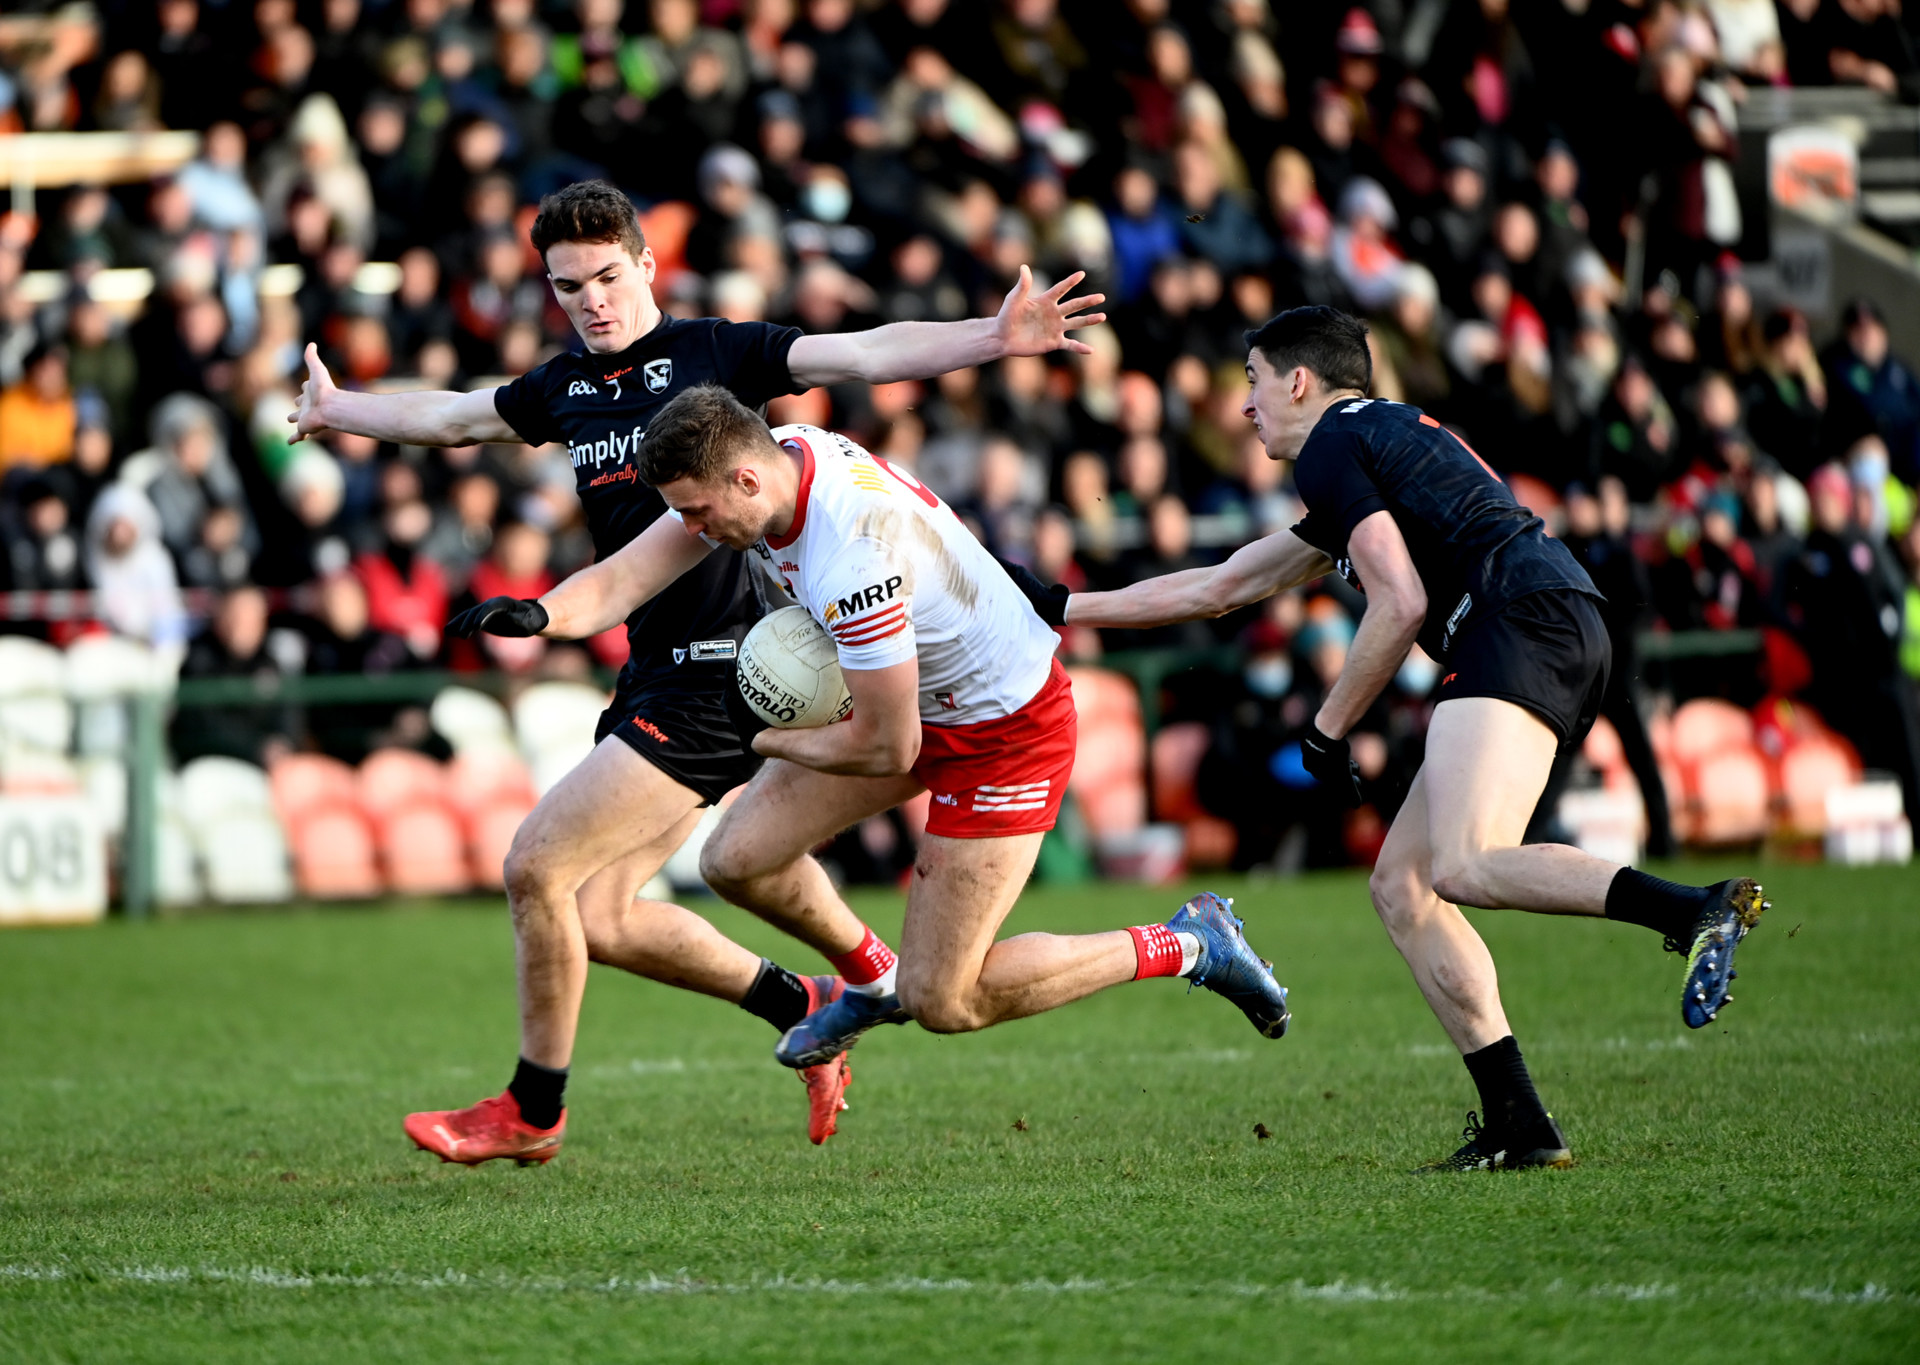 McGuigan expects Tyrone to bounce back